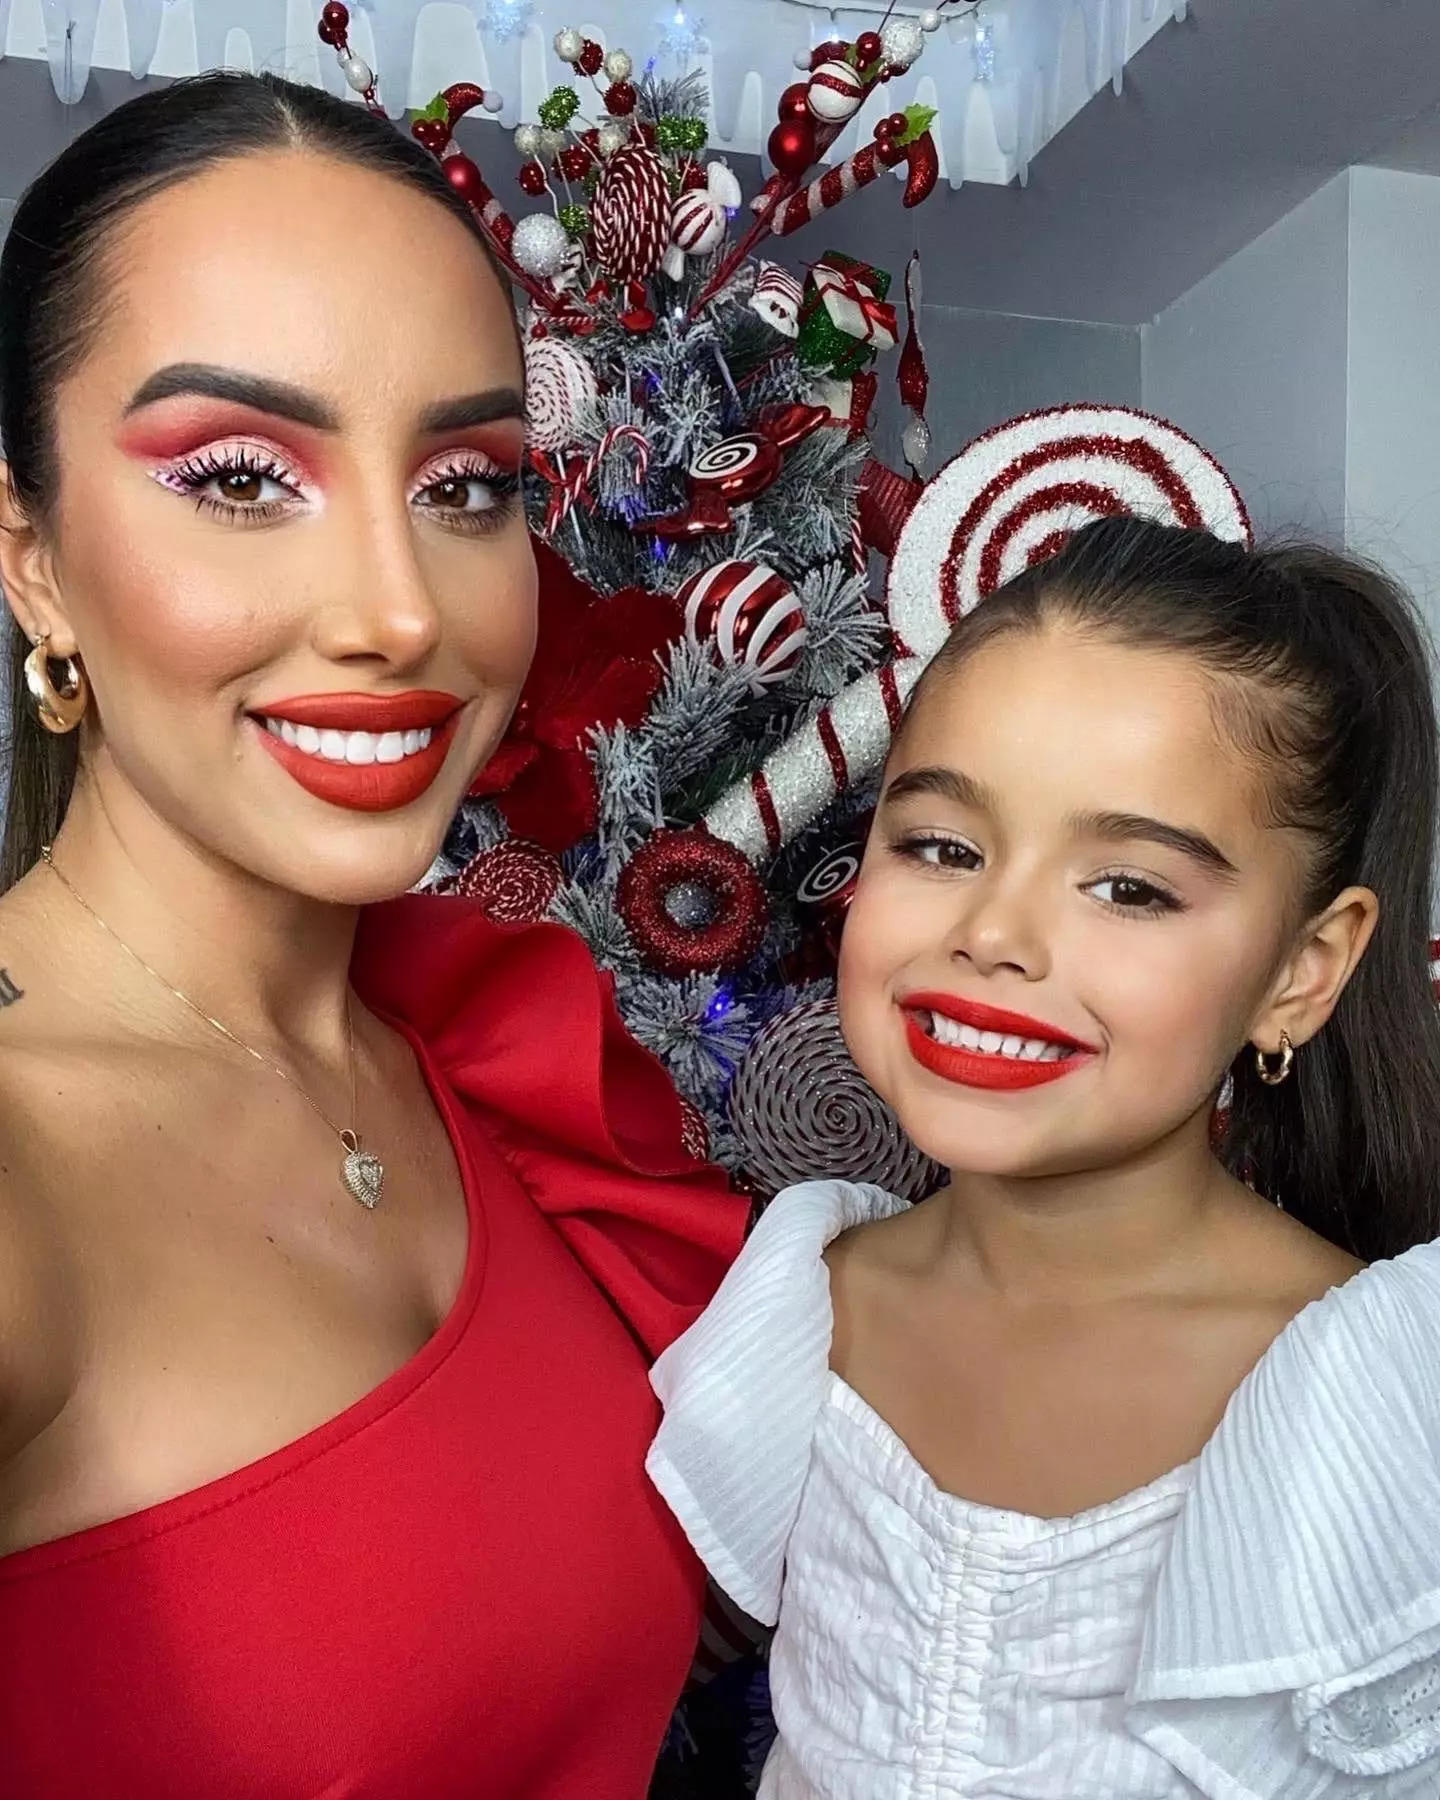 A 6 -year -old TikTok makeup artist along with fans including Huda Kattan and Fenty Beauty is going viral for making an appearance with her mother